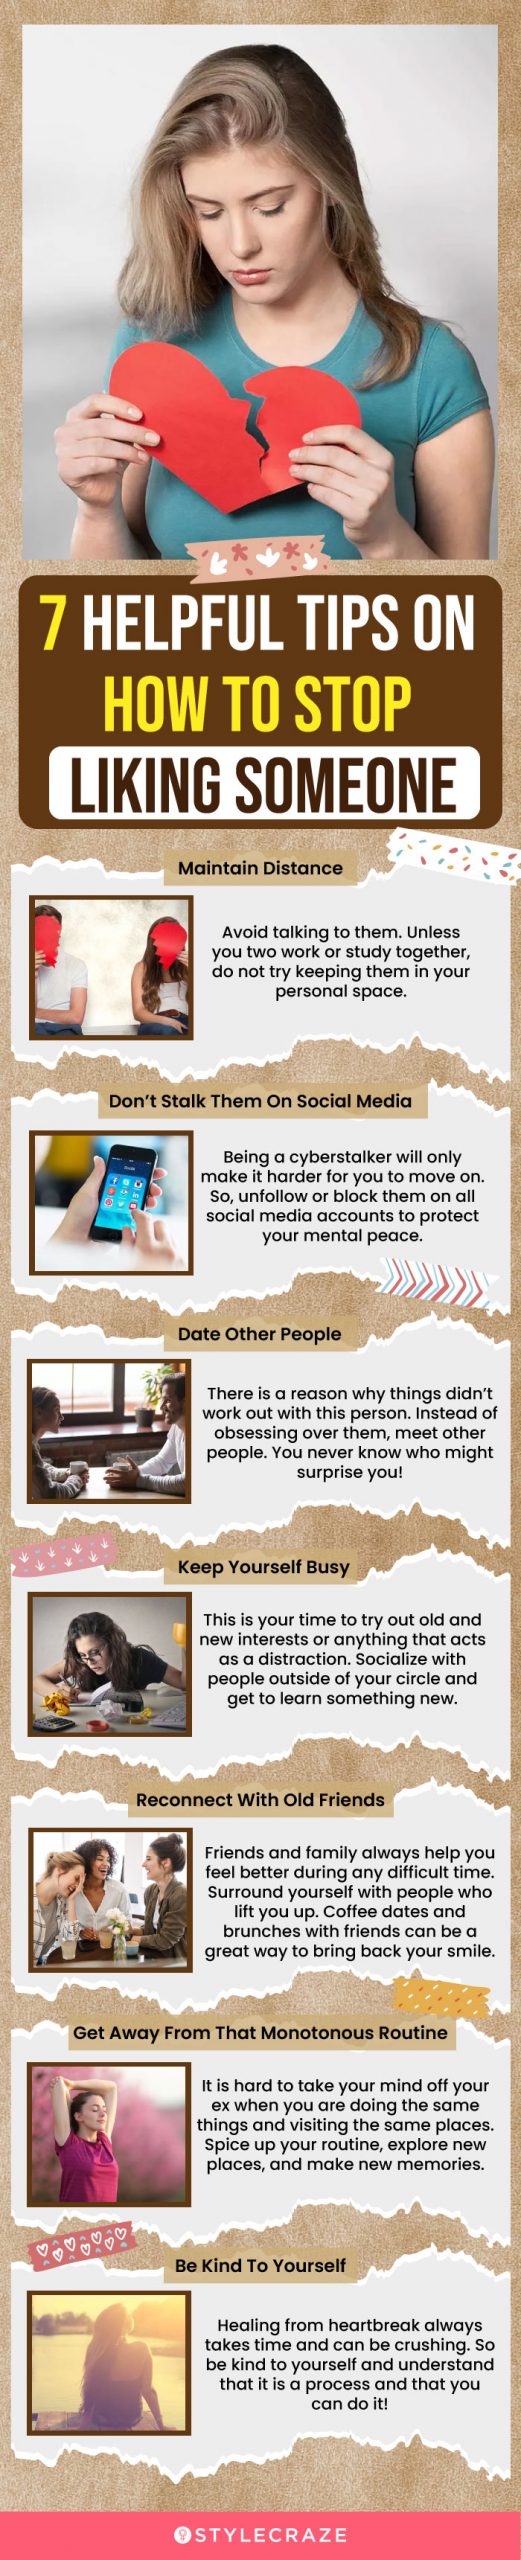 7 helpful tips on how to stop liking someone (infographic)